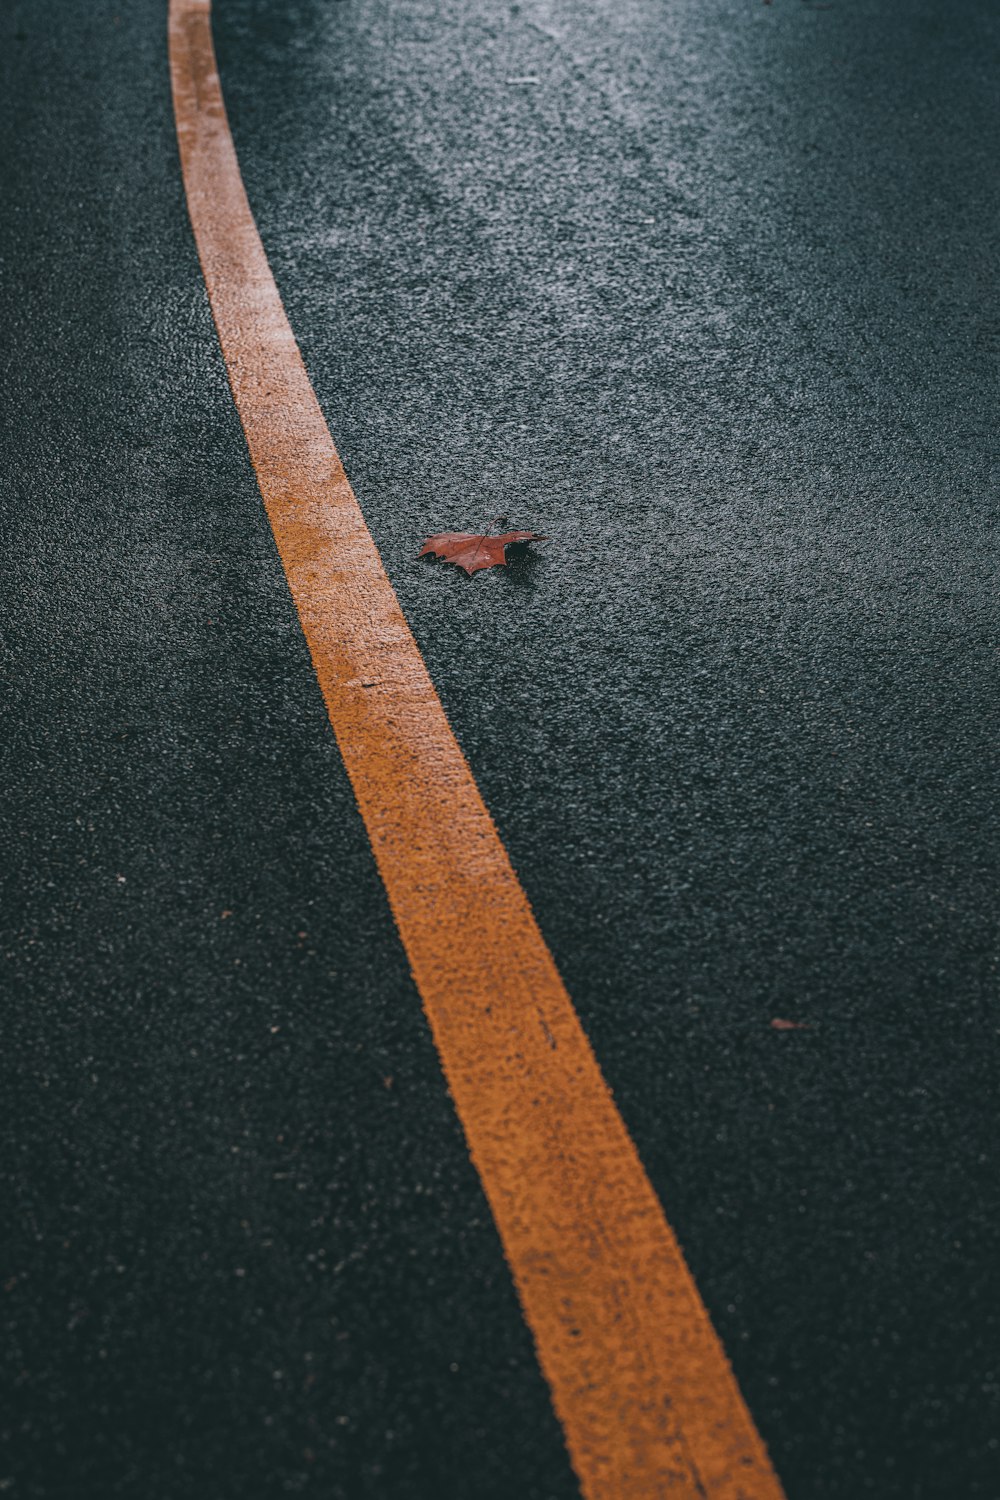 a lone bird sitting on the side of the road